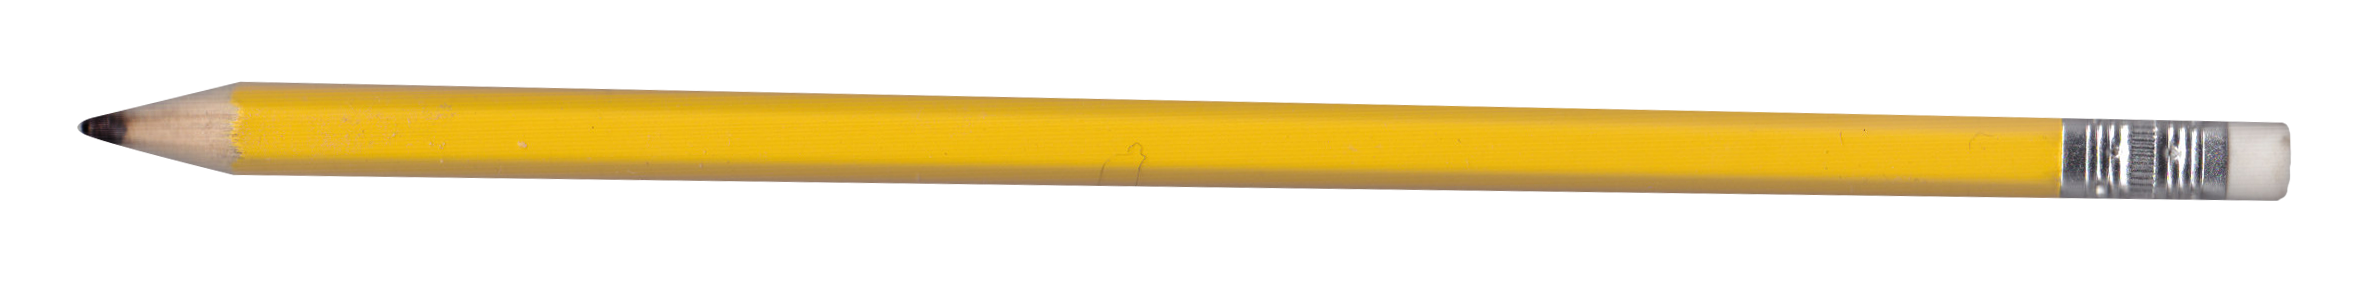 Yellow_Pencil_PNG.png